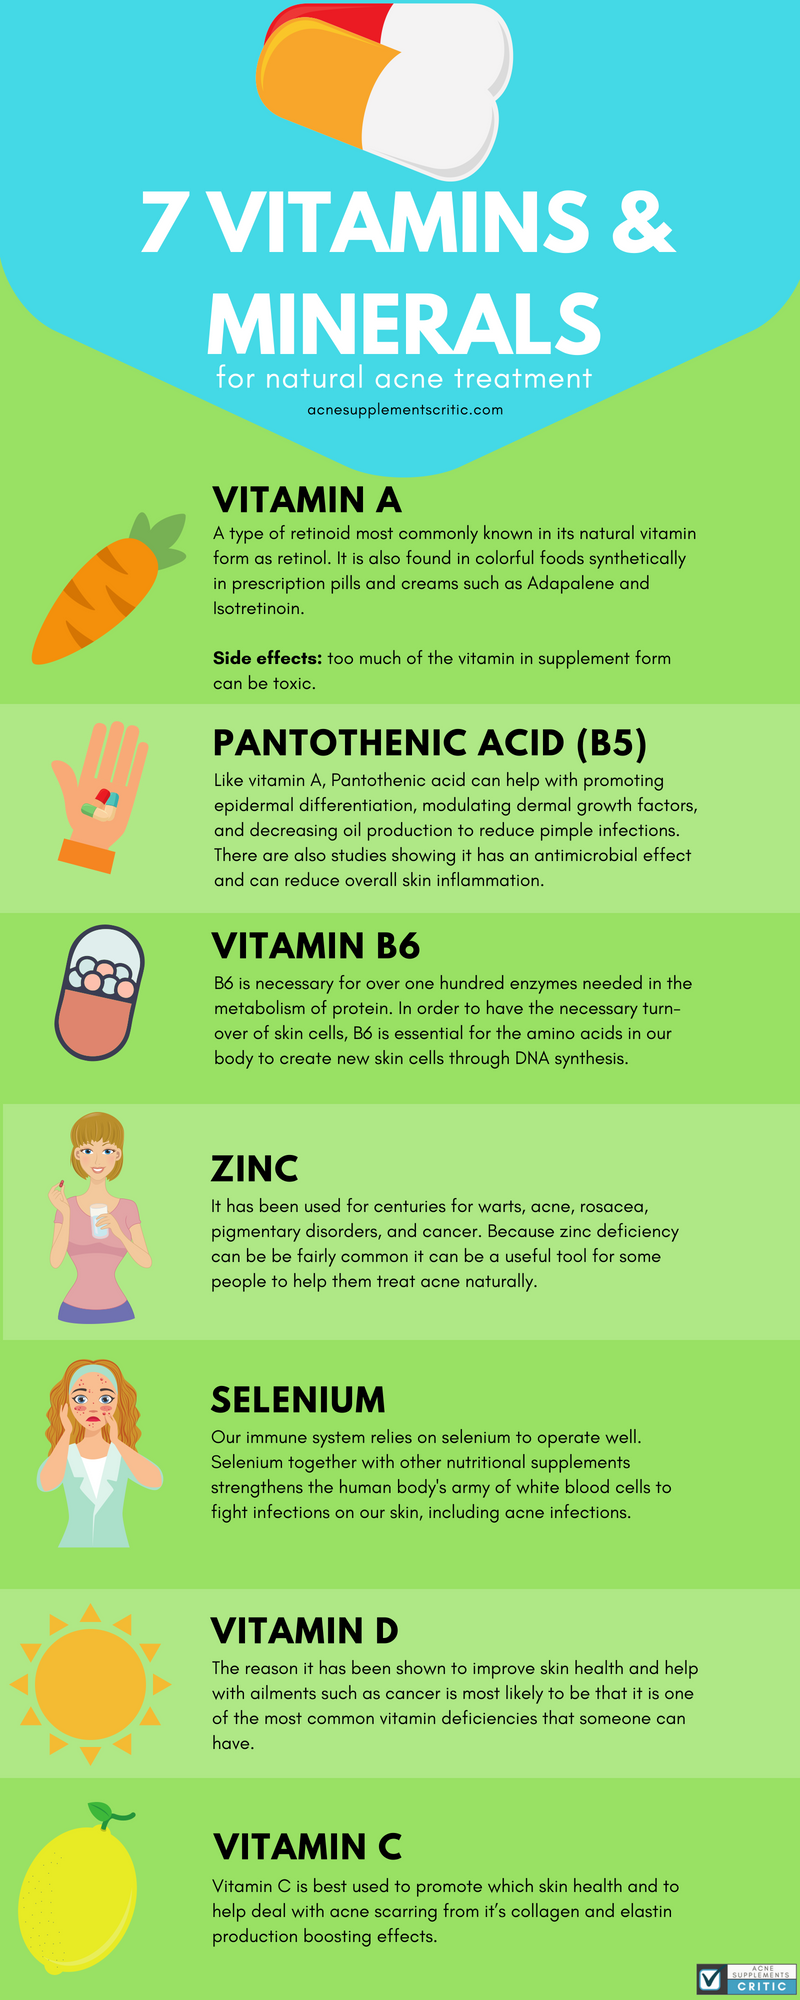 Treating Acne Naturally: 7 Anti-Acne Vitamins & Minerals - Infographic